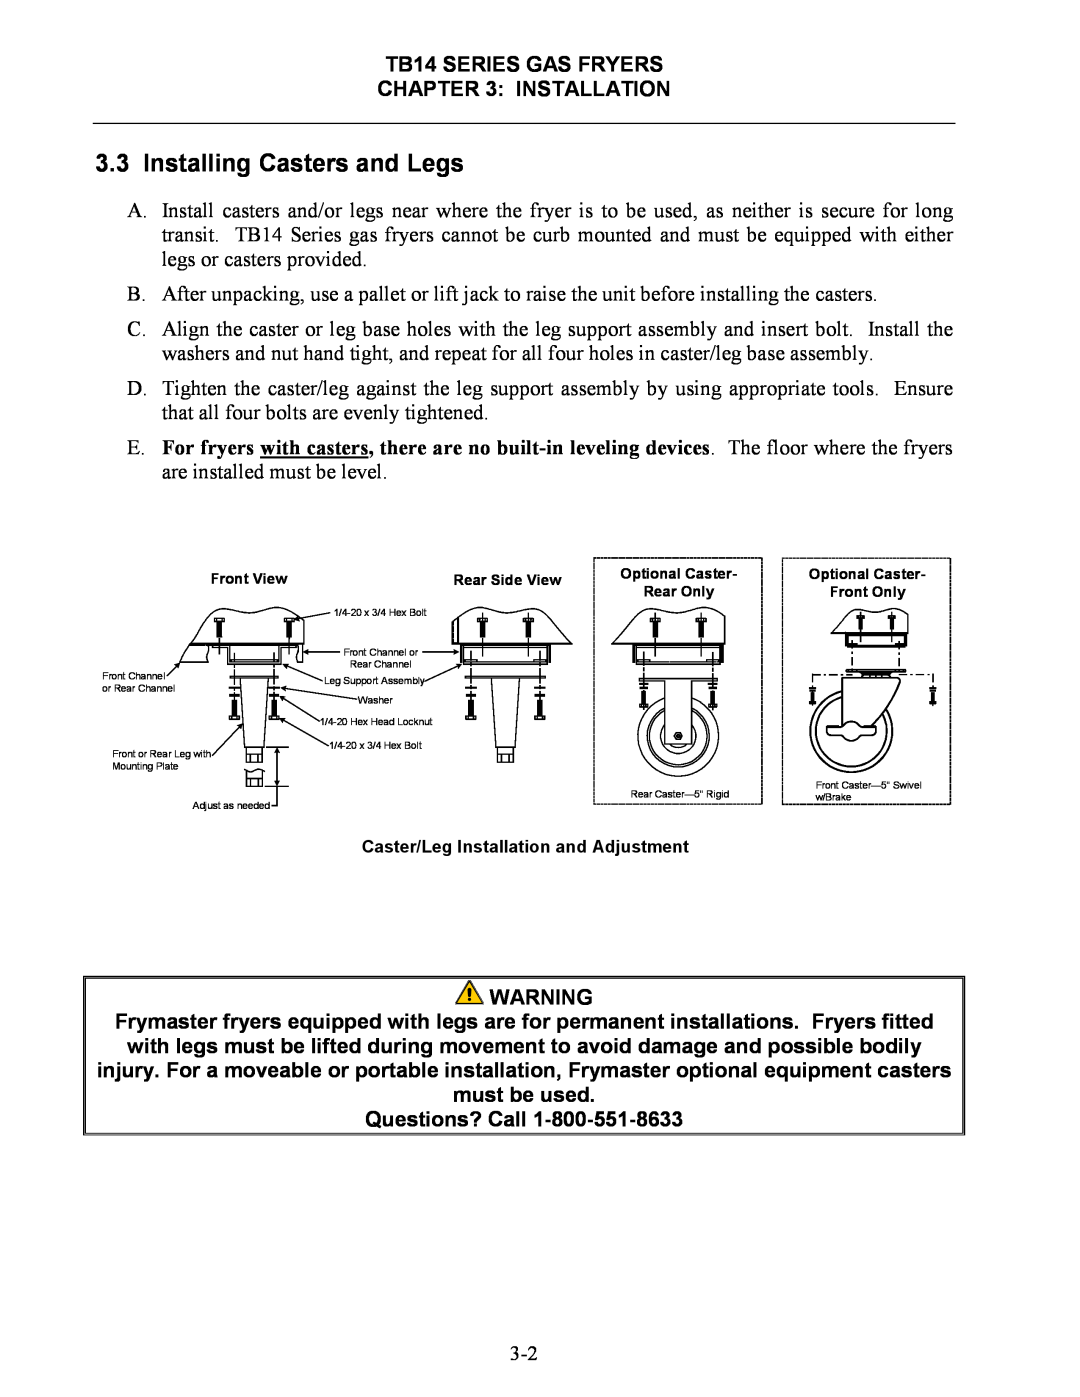 Frymaster operation manual Installing Casters and Legs, TB14 SERIES GAS FRYERS INSTALLATION, Questions? Call 